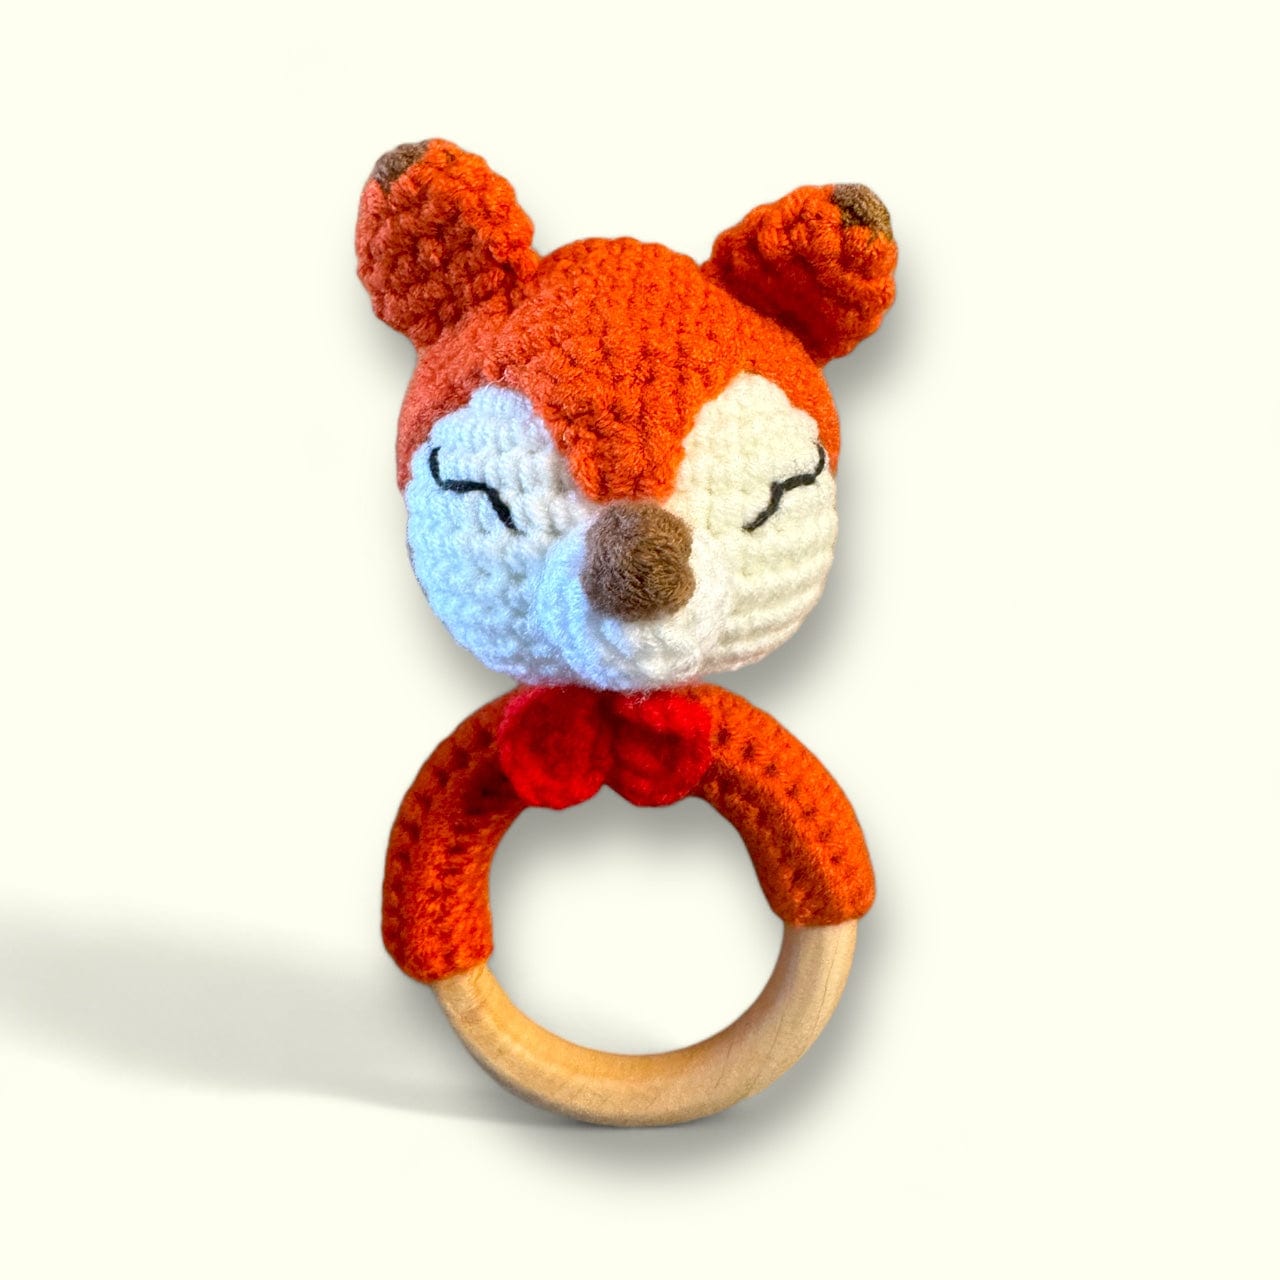 Best Day Ever Kids rattles Fox HAND CROCHET RATTLE buy online boutique kids clothing